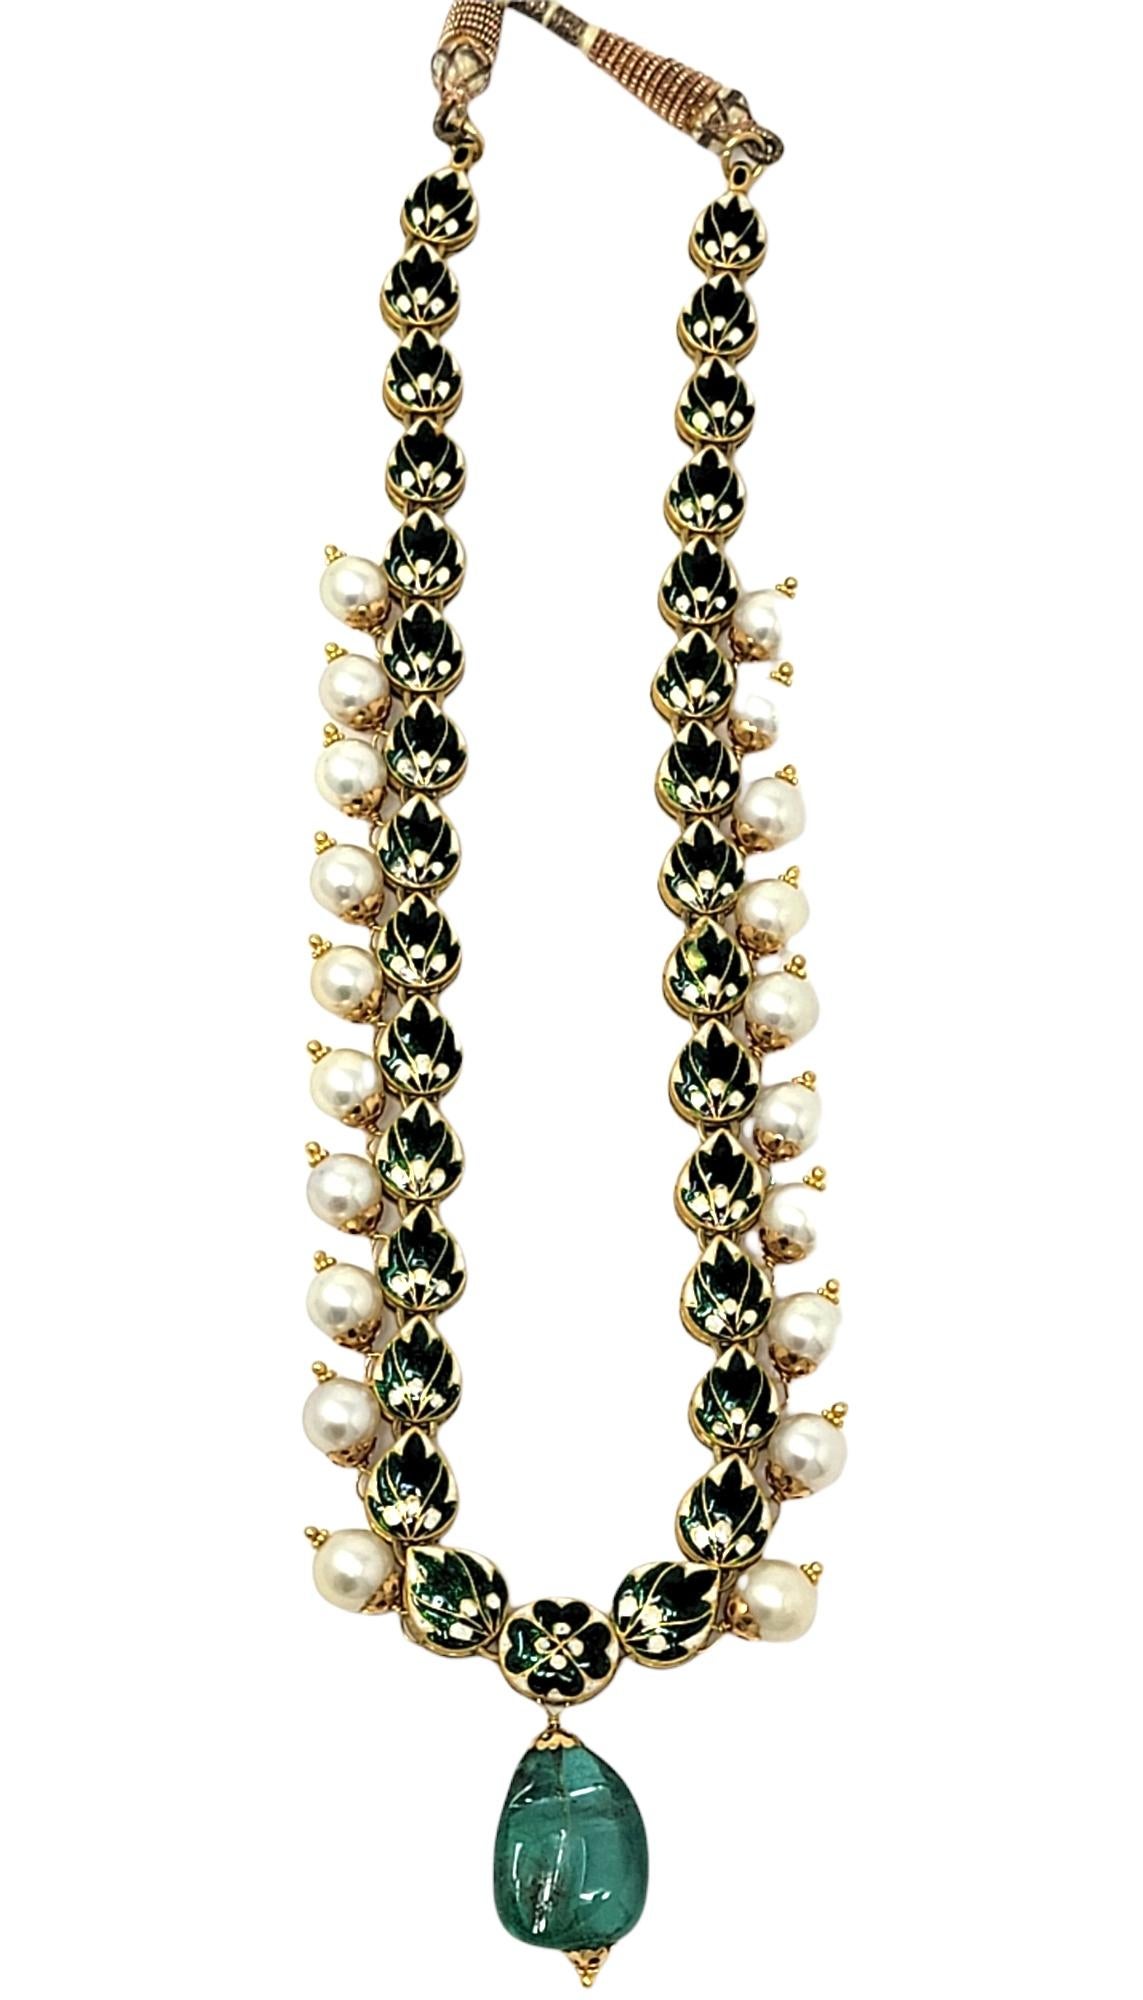 Vintage Handmade Mother of Pearl, Uncut Diamond and Emerald Stone Polki Necklace In Good Condition For Sale In Scottsdale, AZ